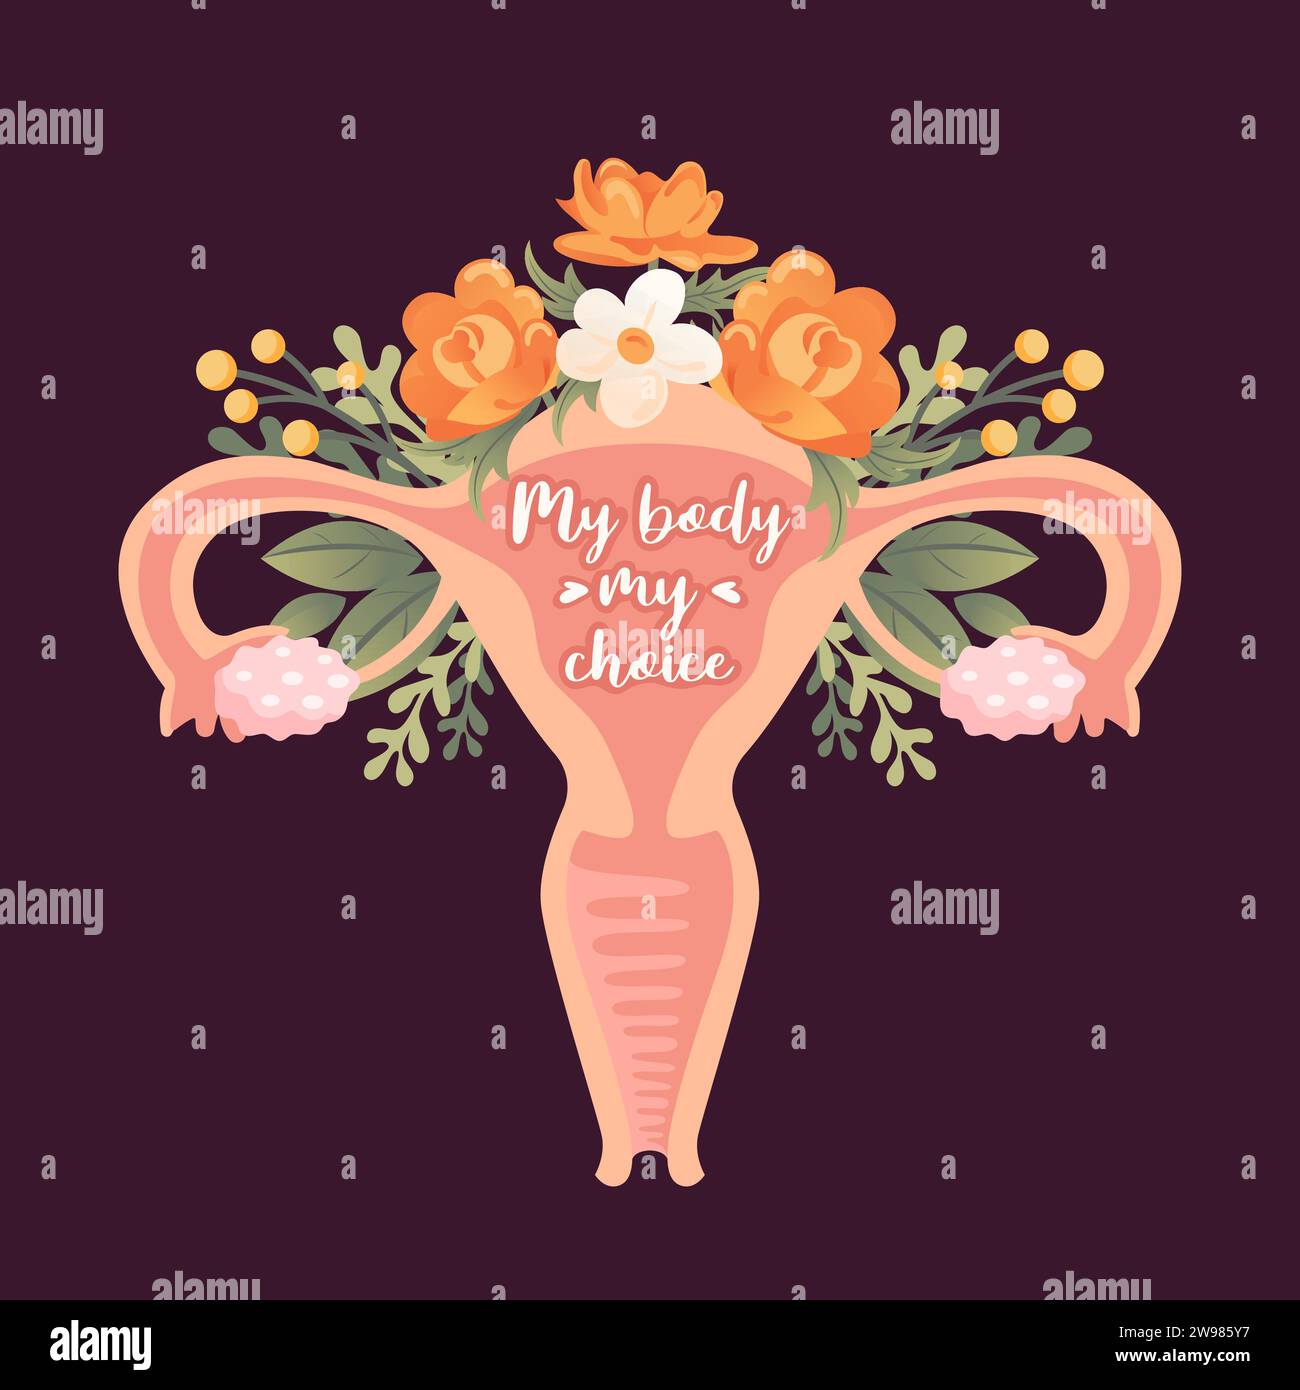 My body my choice. Uterus and flowers. Women Health. Female reproductive system, cycle. Womens Rights. Feminism Concept. organs of the uterus, cervix, Stock Vector